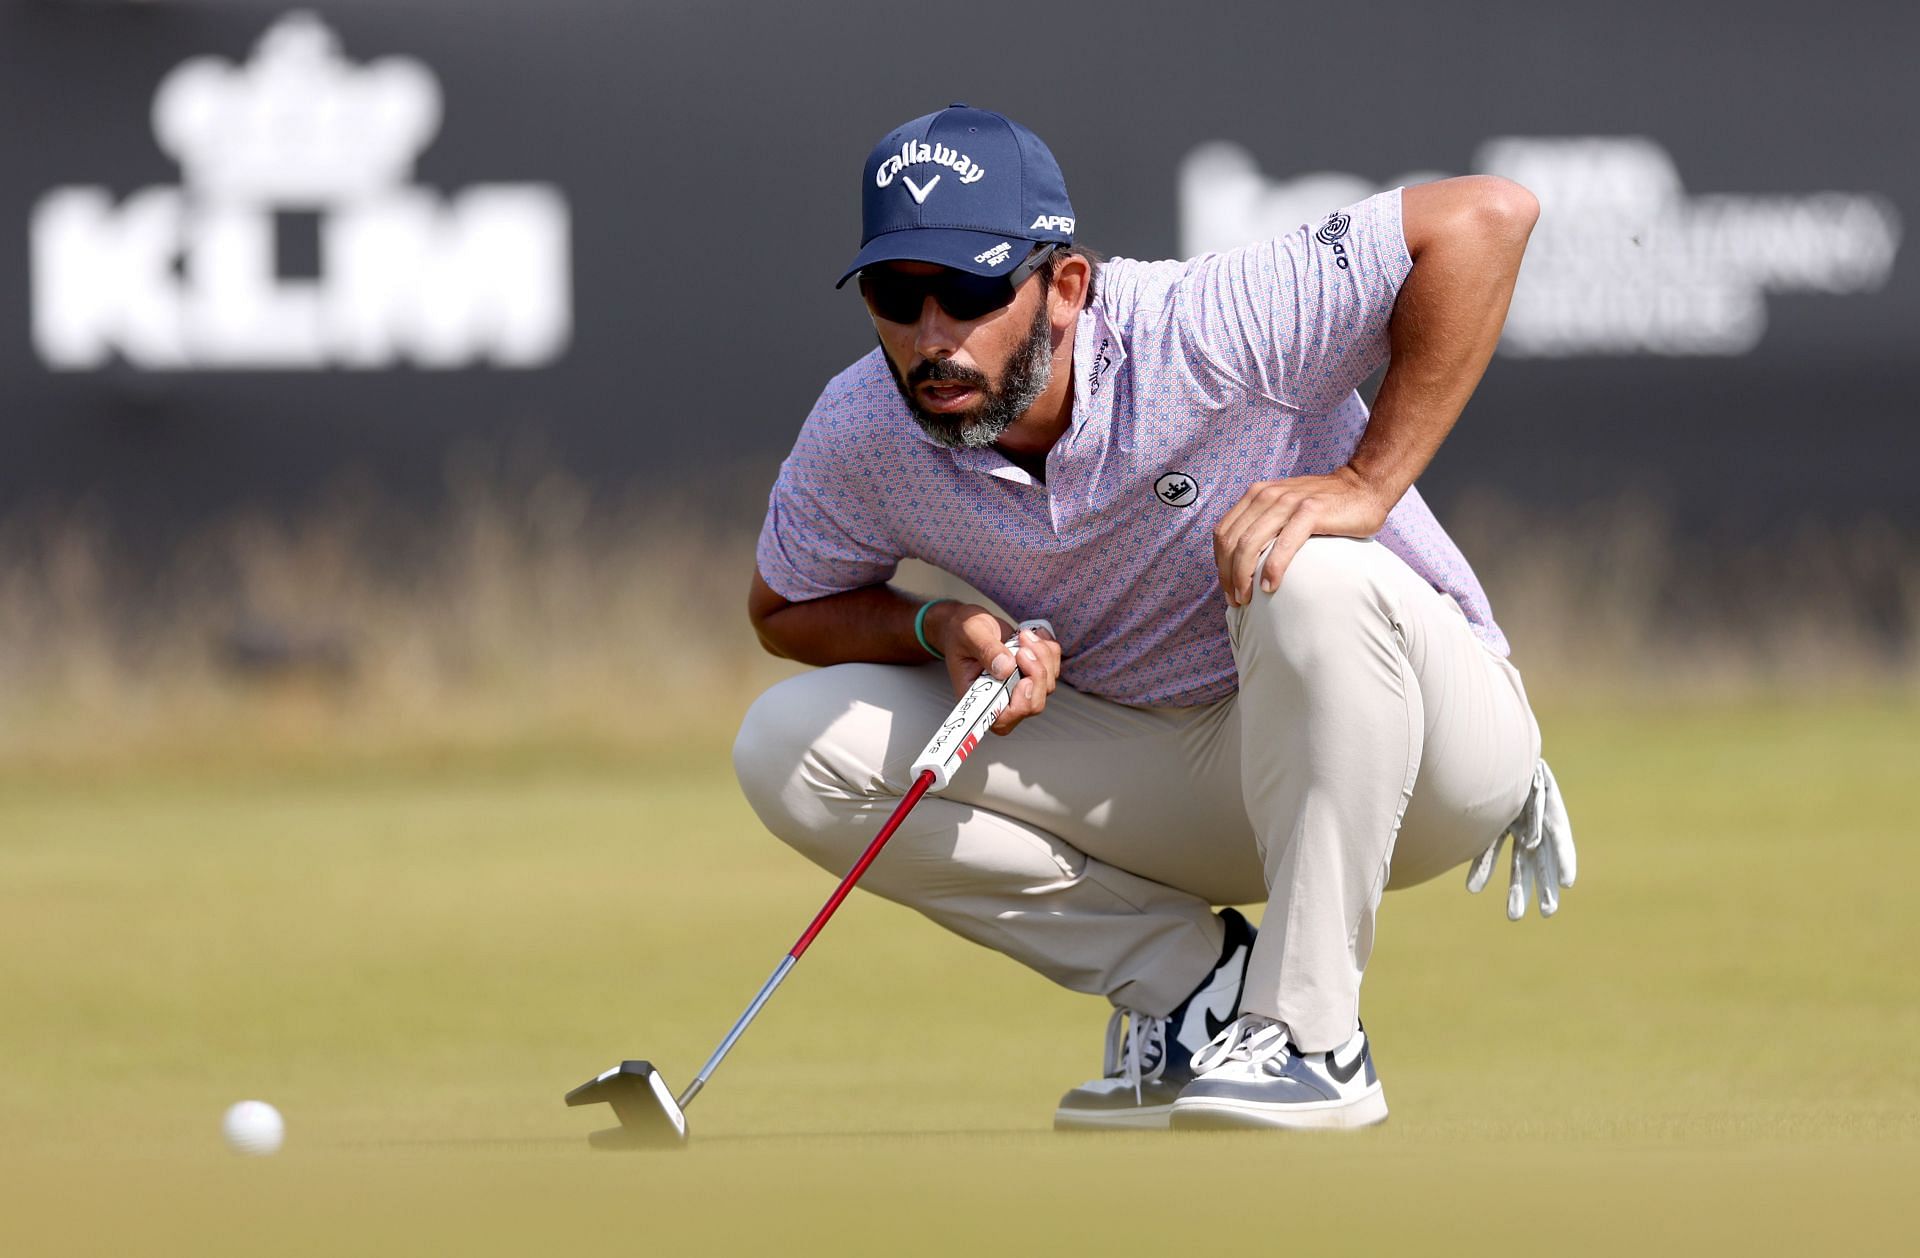 Pablo Larrazabal playing his final hole to win the 2023 KLM Open (Image via Getty).